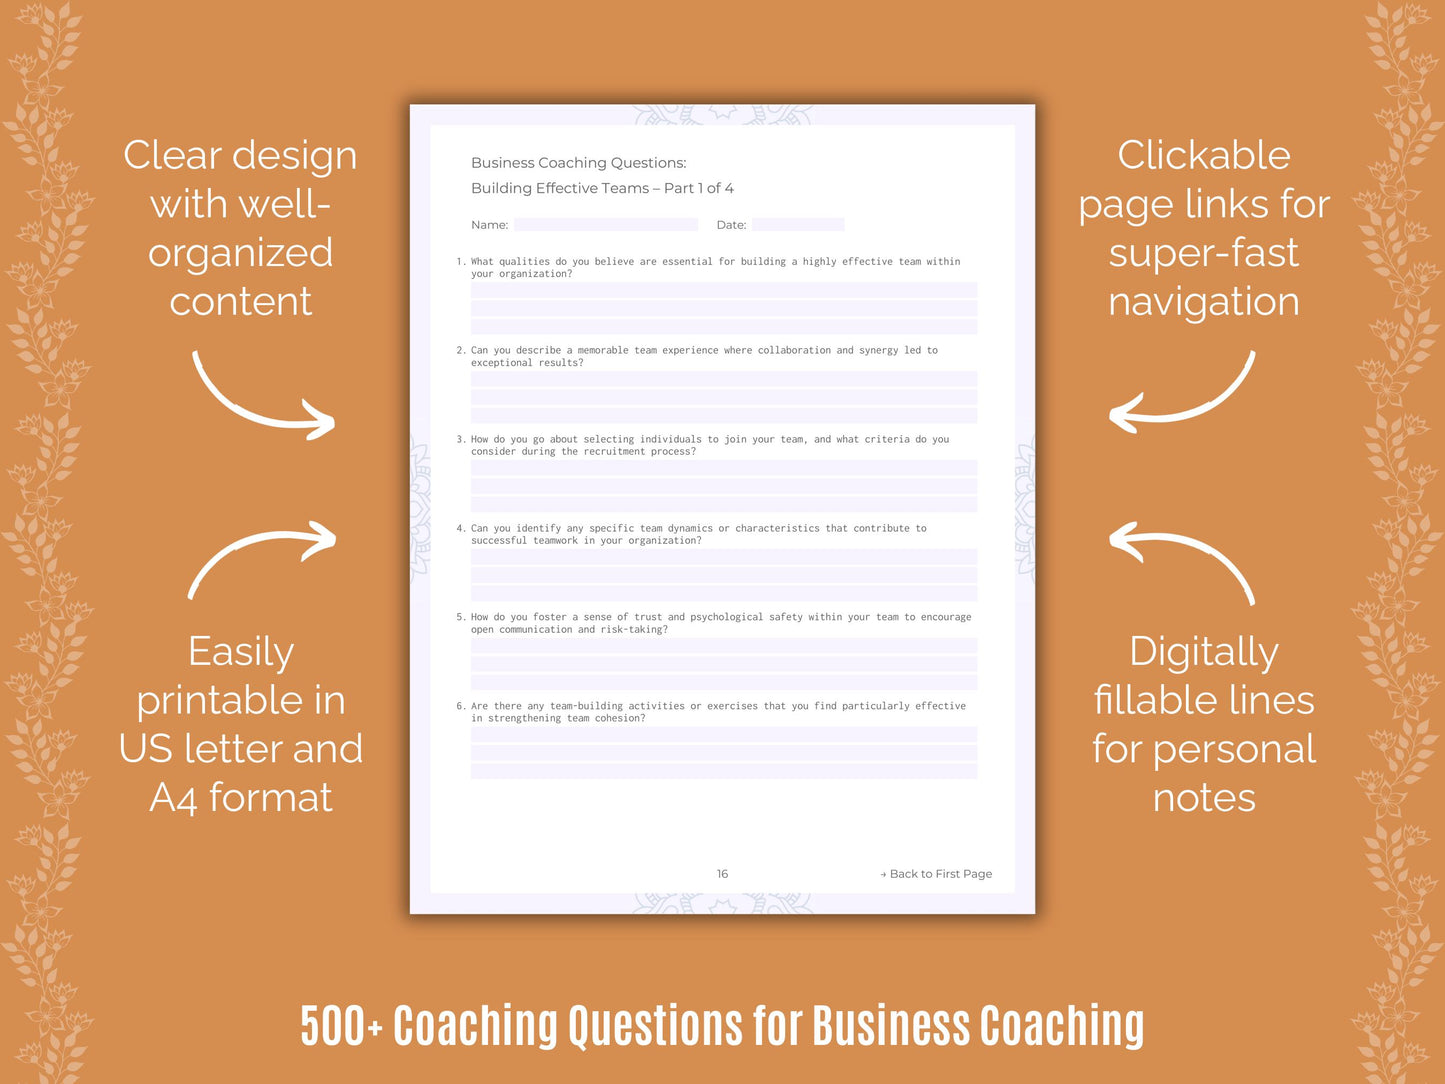 Business Coaching Questions Resource